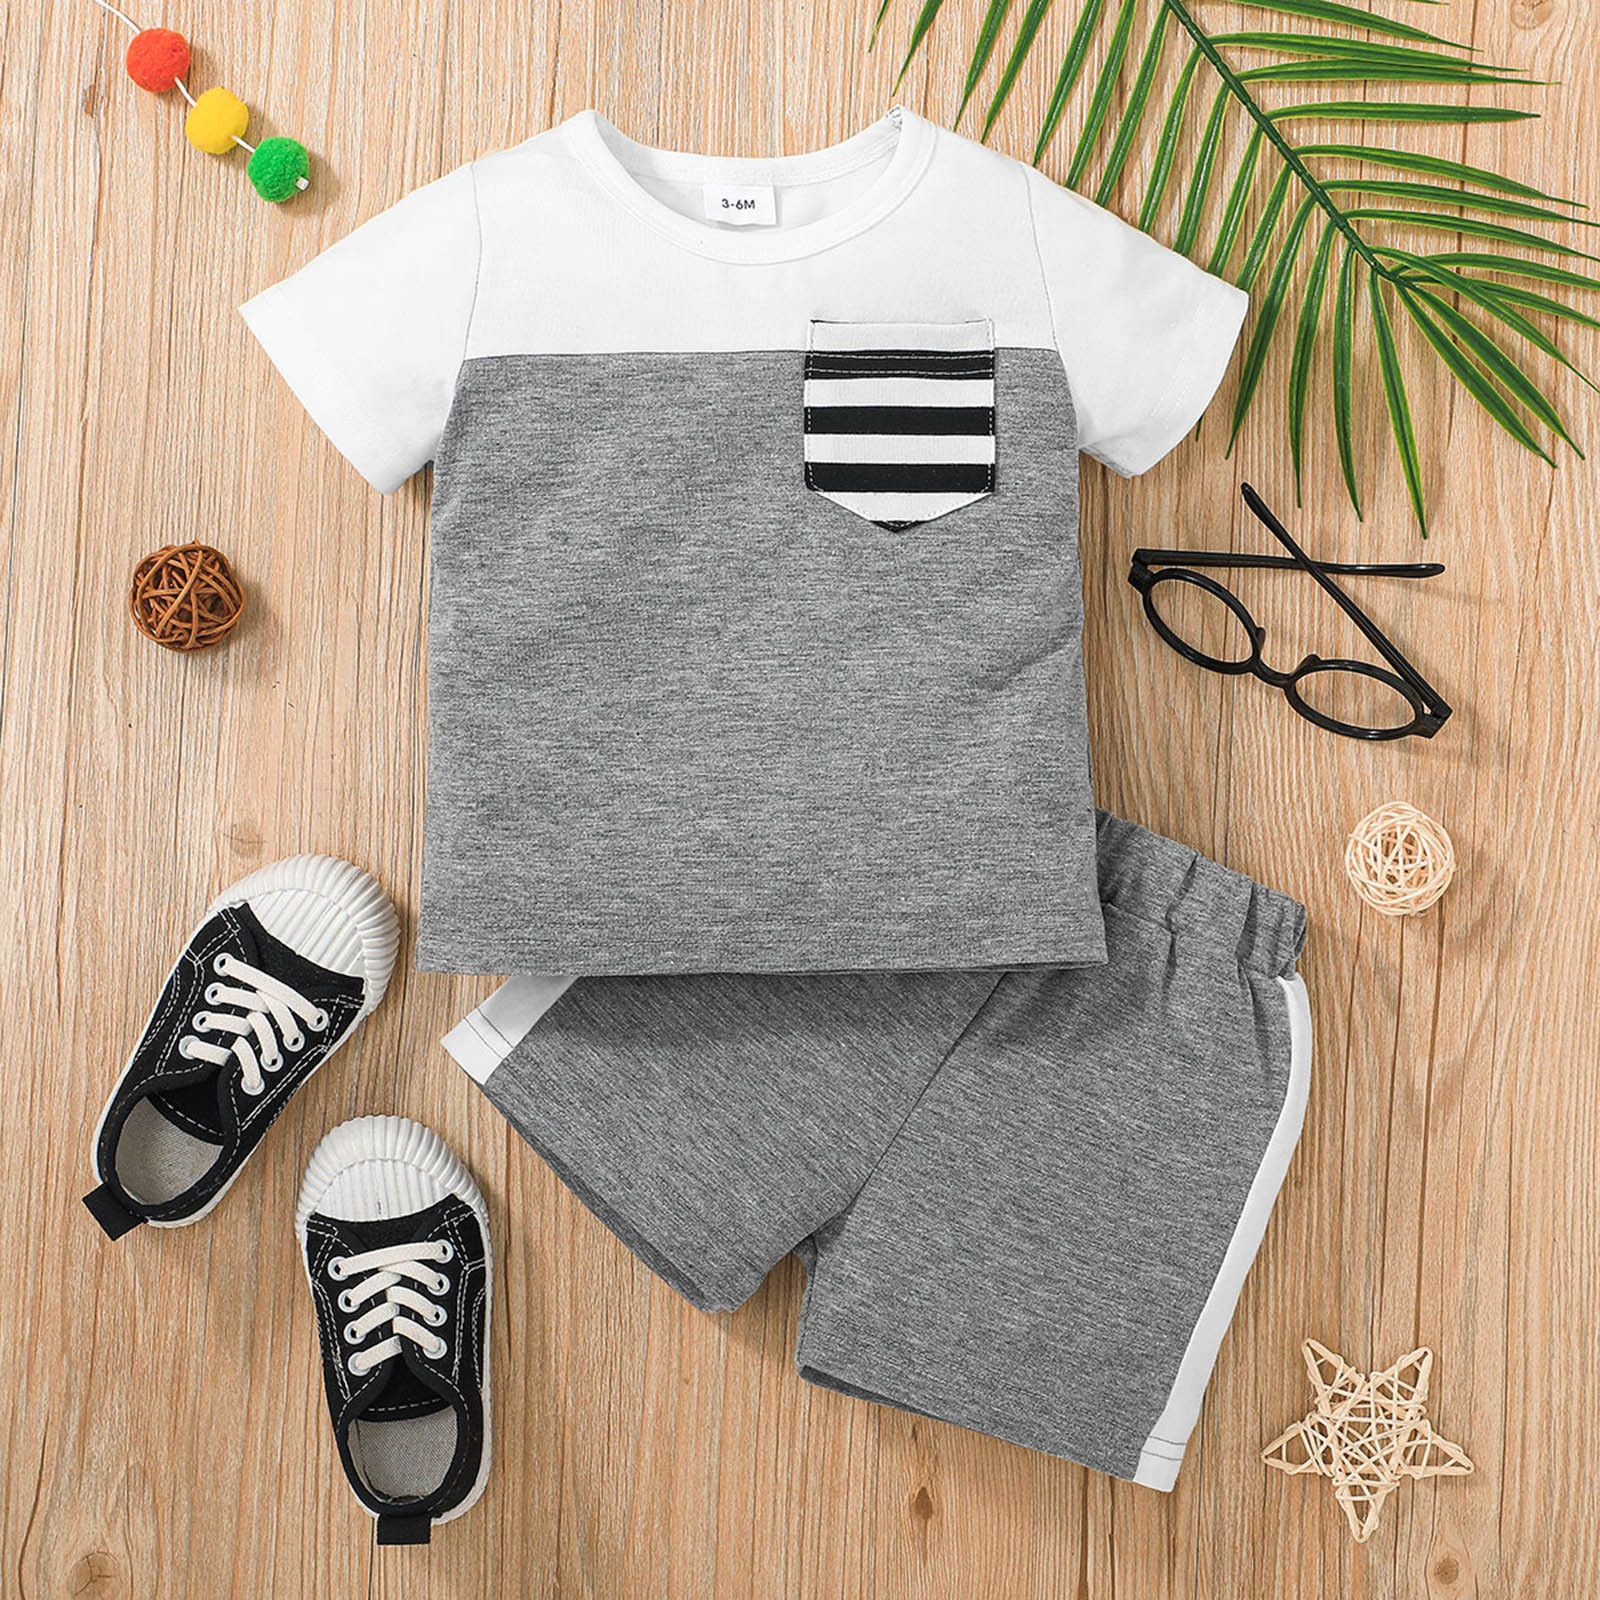 New Born Baby Girl Outfit Baby Clothes Girl Striped T-shirt Boys Sleeve Outfits 3M-24M Baby Sports Girls Short Tops Printed Shorts Girls Outfits&Set Girls Fashion Size 7 8 - image 3 of 9